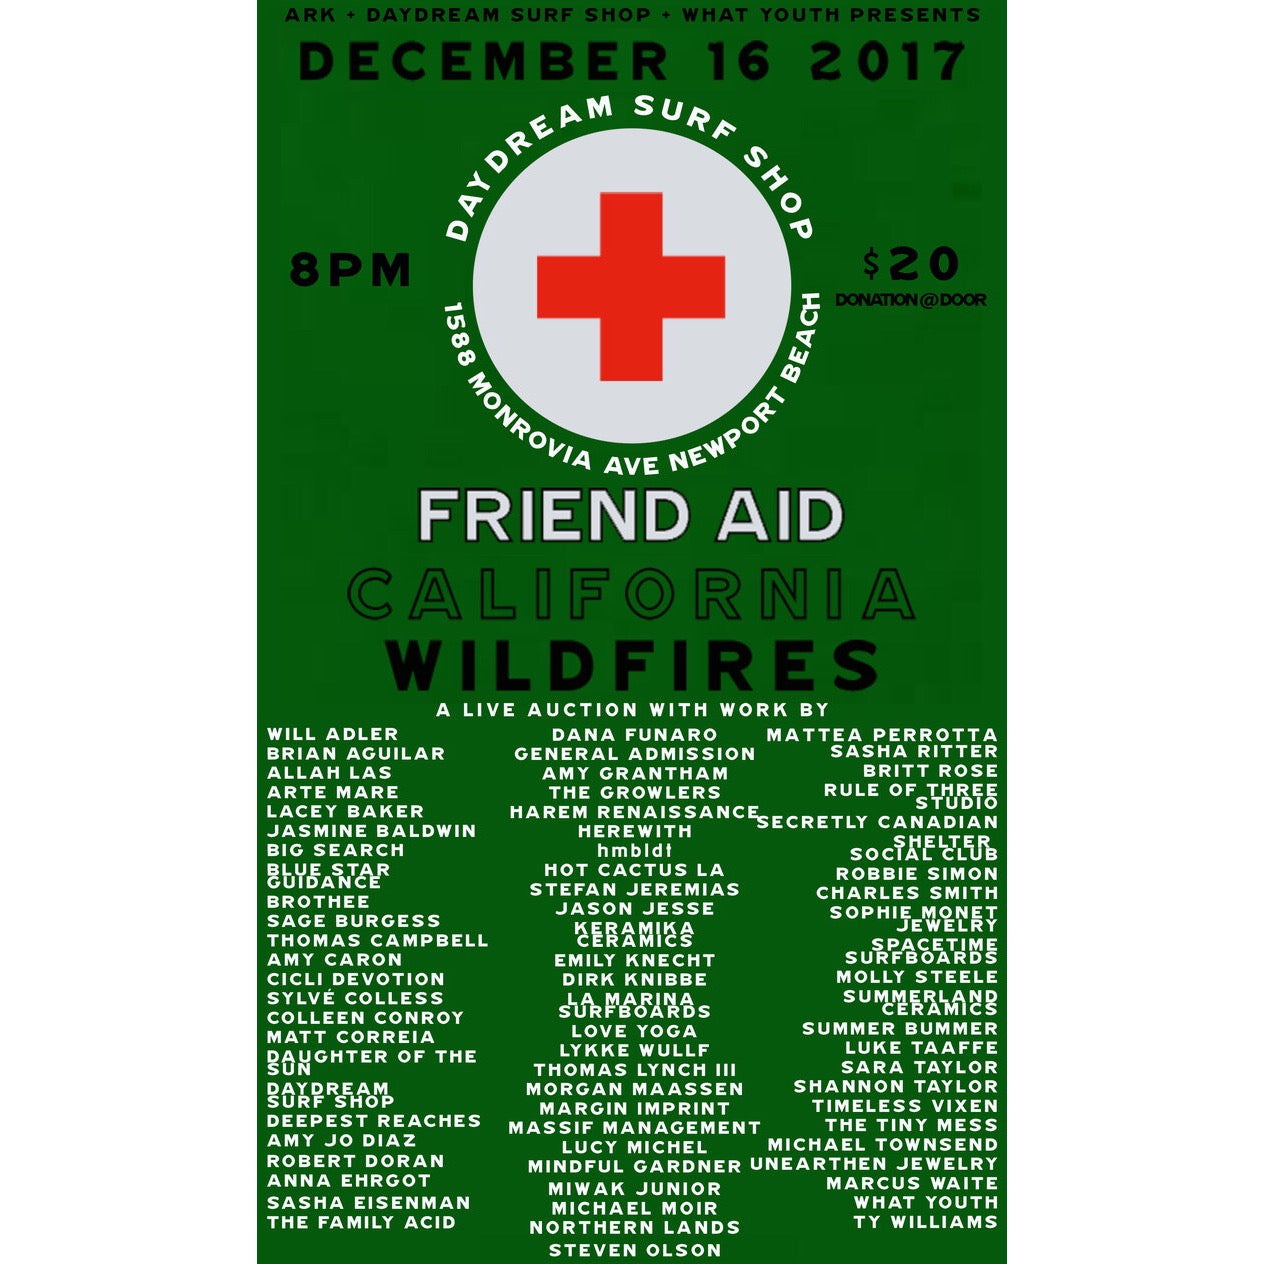 Friend Aid Auction Event 12/16 for Thomas Fire Relief Fund